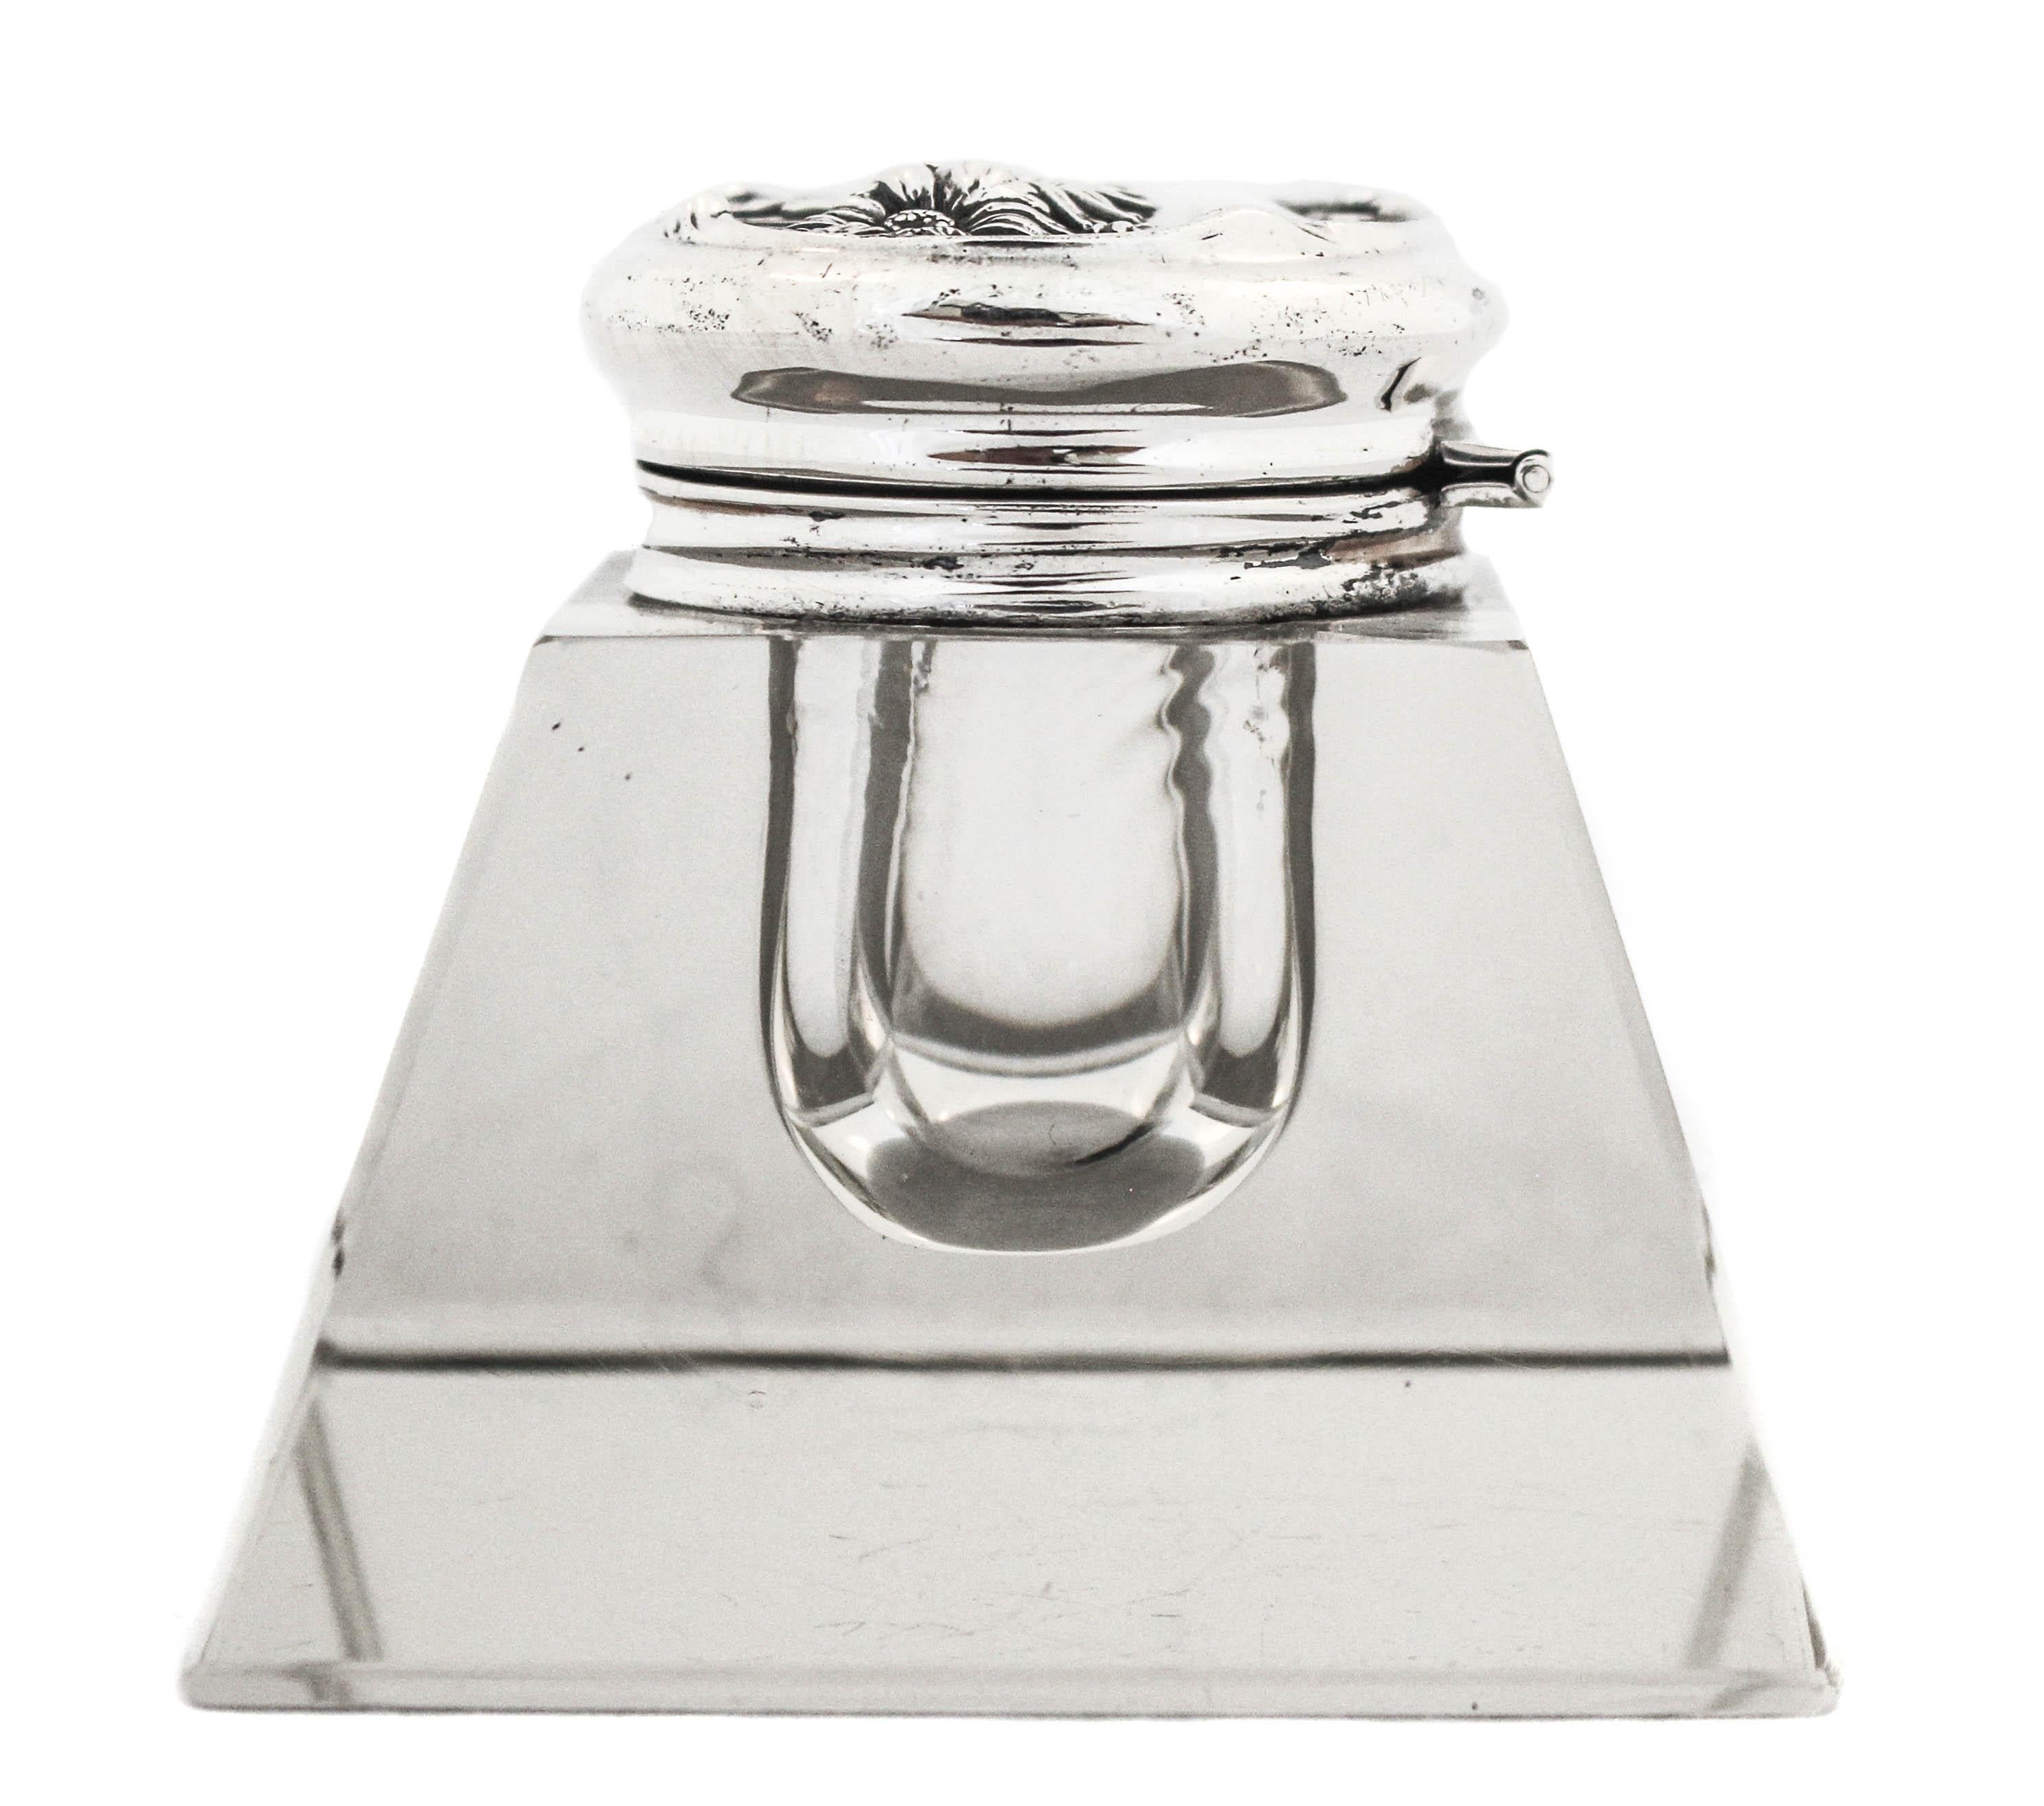 This sterling silver inkwell conjures memories of a time when letter writing was an art and people waited for letters from loved ones with anticipation. The lid has an Art Nouveau motif and lifts upwards. The base is square and has a flat bottom.